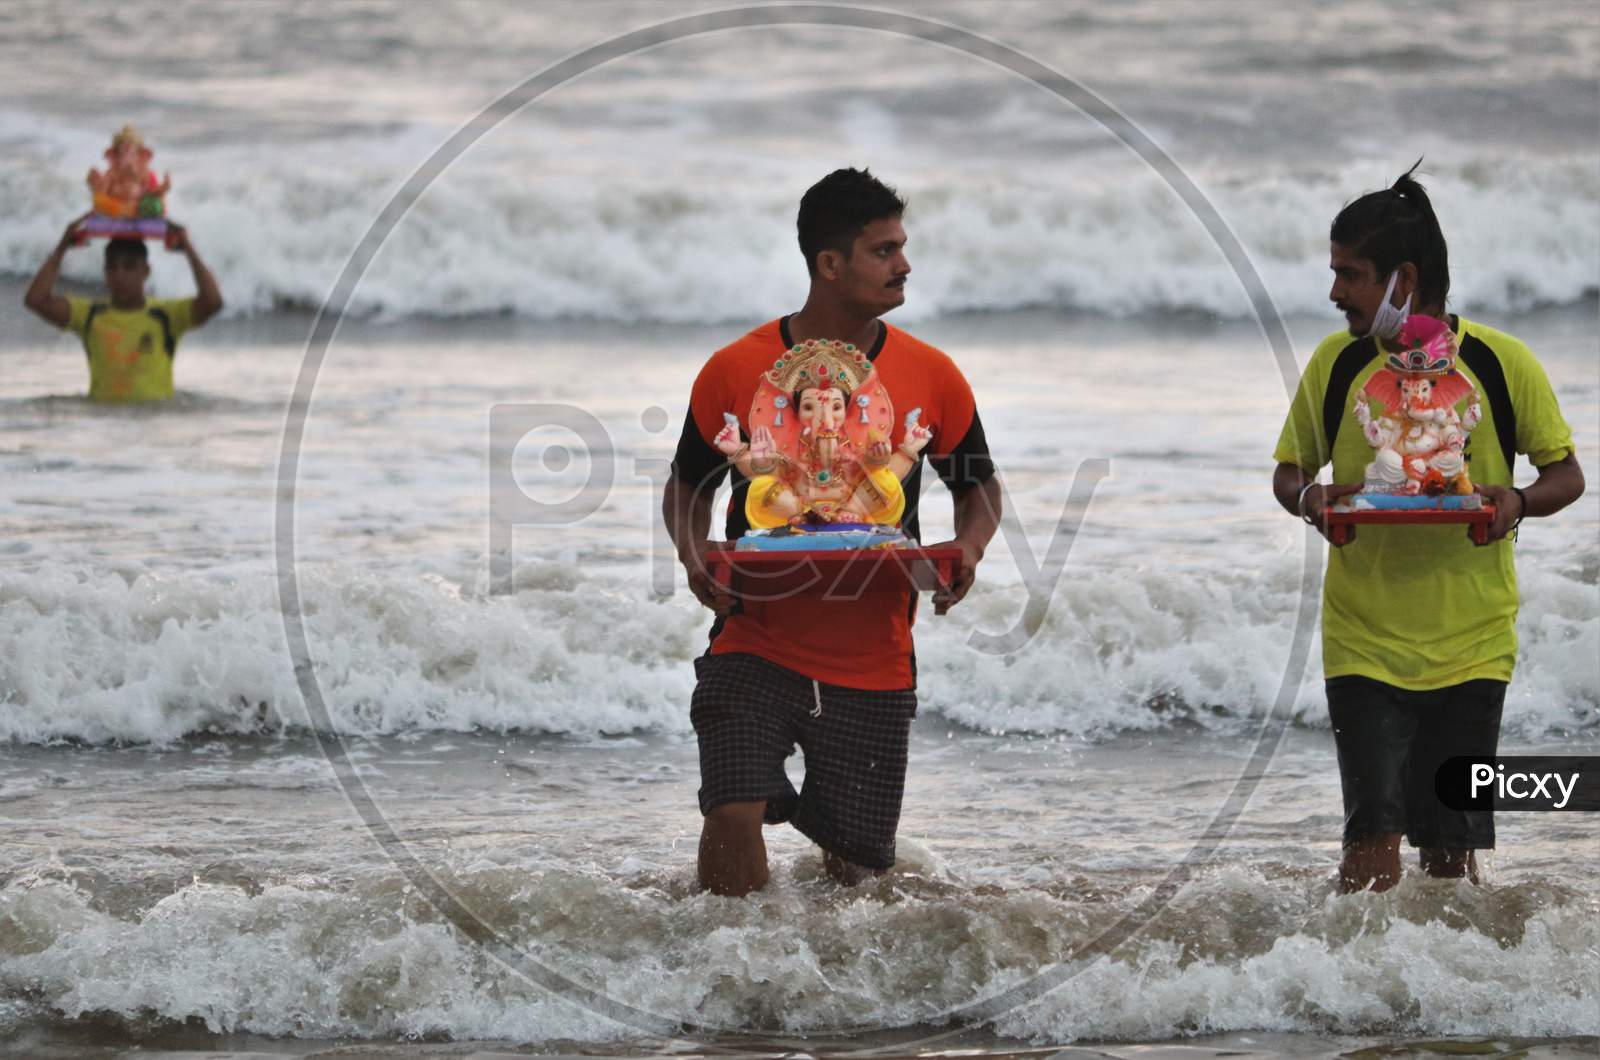 People carry an idol of the Hindu god Ganesh, the deity of prosperity, to immerse it into the waters of the Arabian sea on the fifth day of the 10-day long Ganesh Chaturthi festival in Mumbai, India on August 26, 2020.